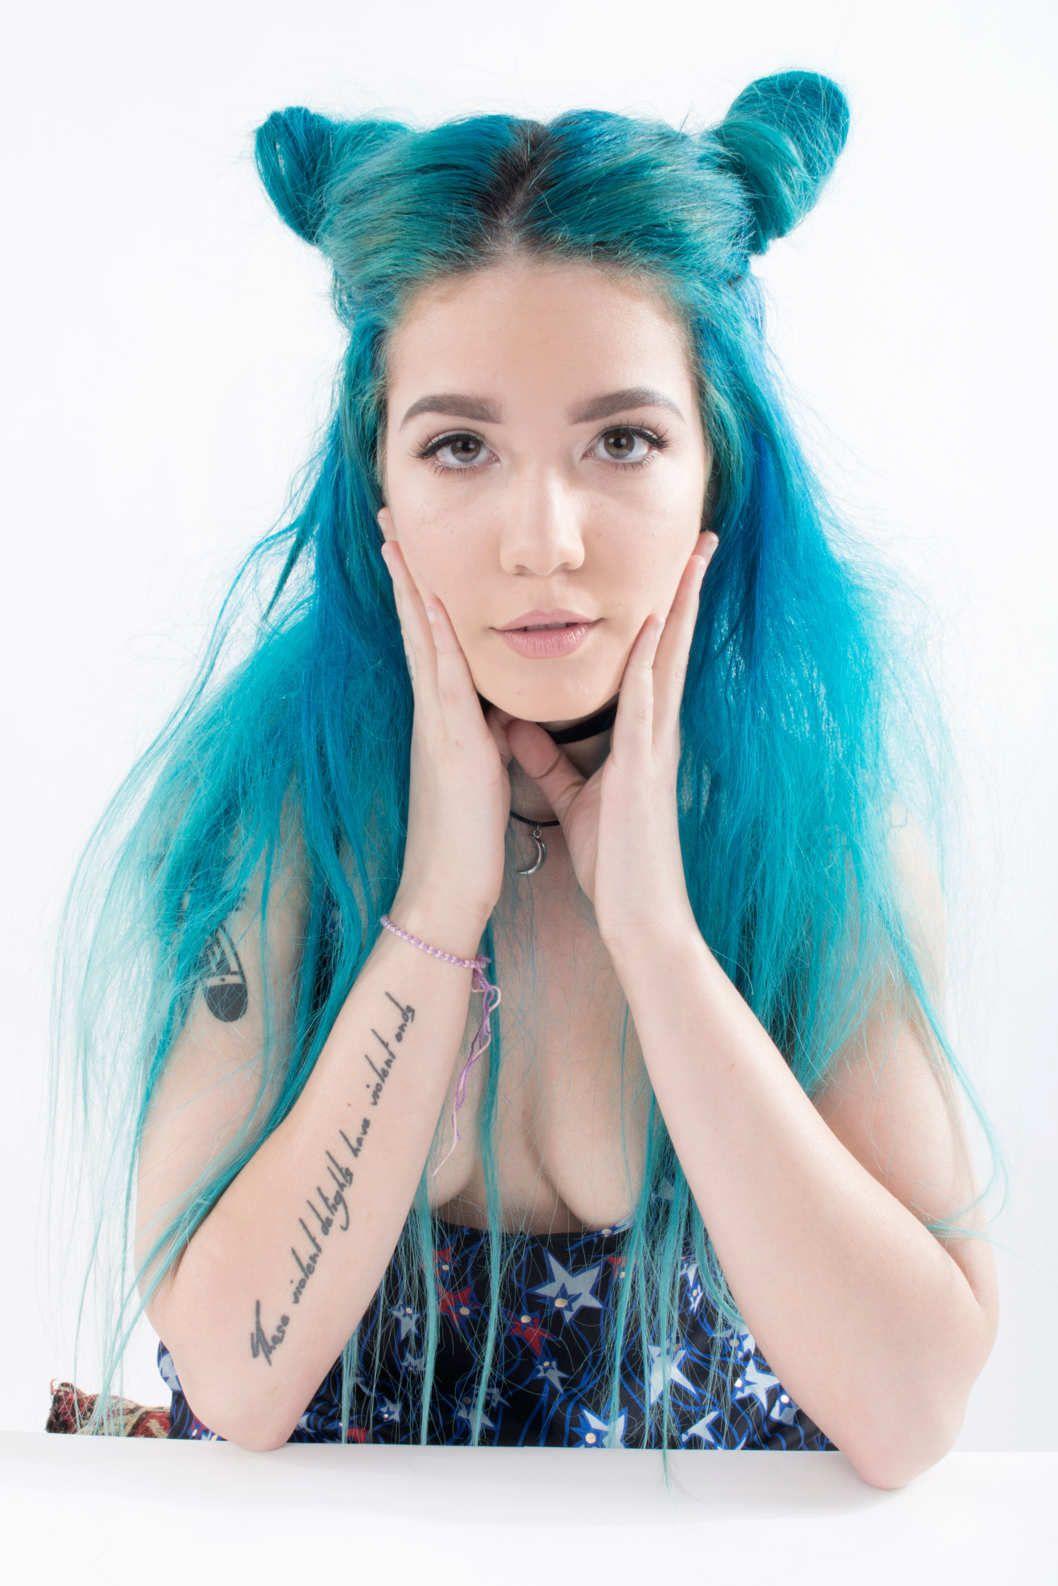 halsey Image. Full HD Picture